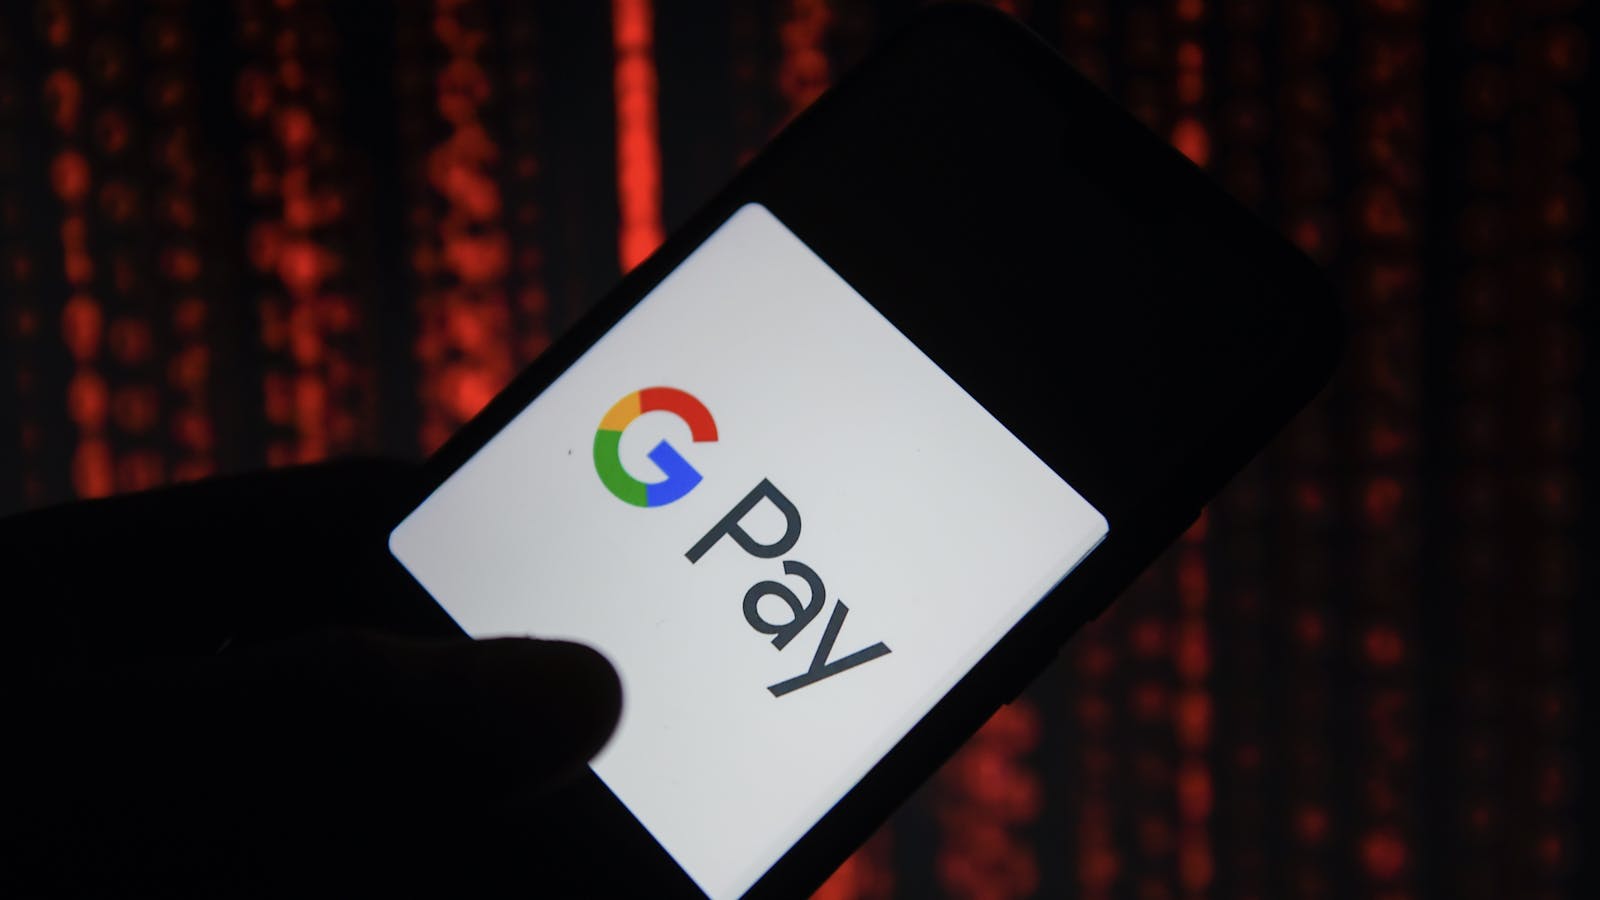 Google Pay on a smartphone. Photo by AP